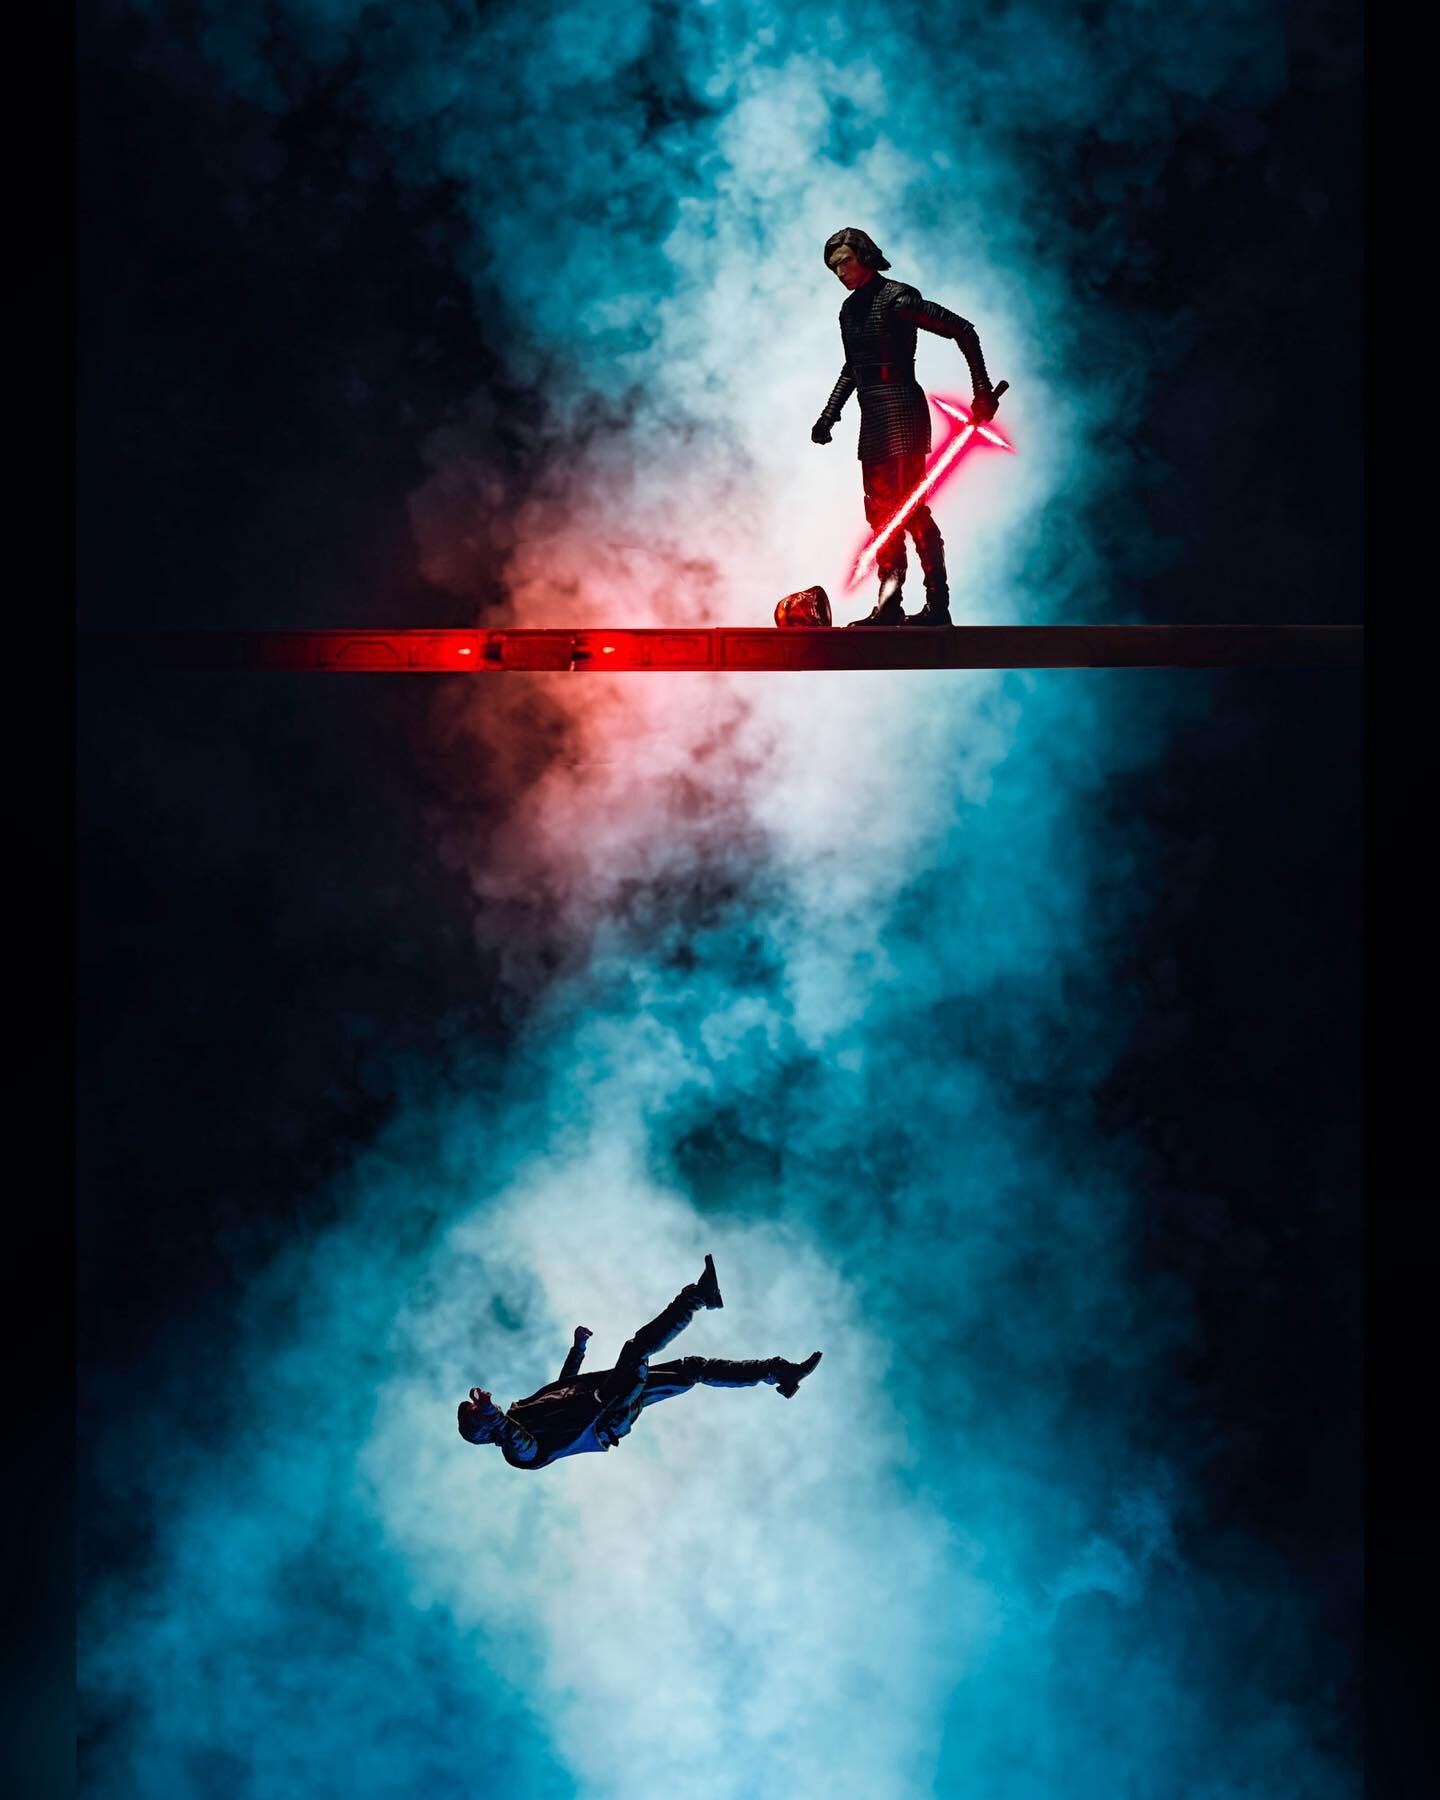 &ldquo;Death of a Scoundrel&rdquo;
I wanted to shoot a silhouette and I thought this scene from TFA could make for an interesting composition. It came out more vivid than my original vision but I think its pretty eye-catching. I created the platform 